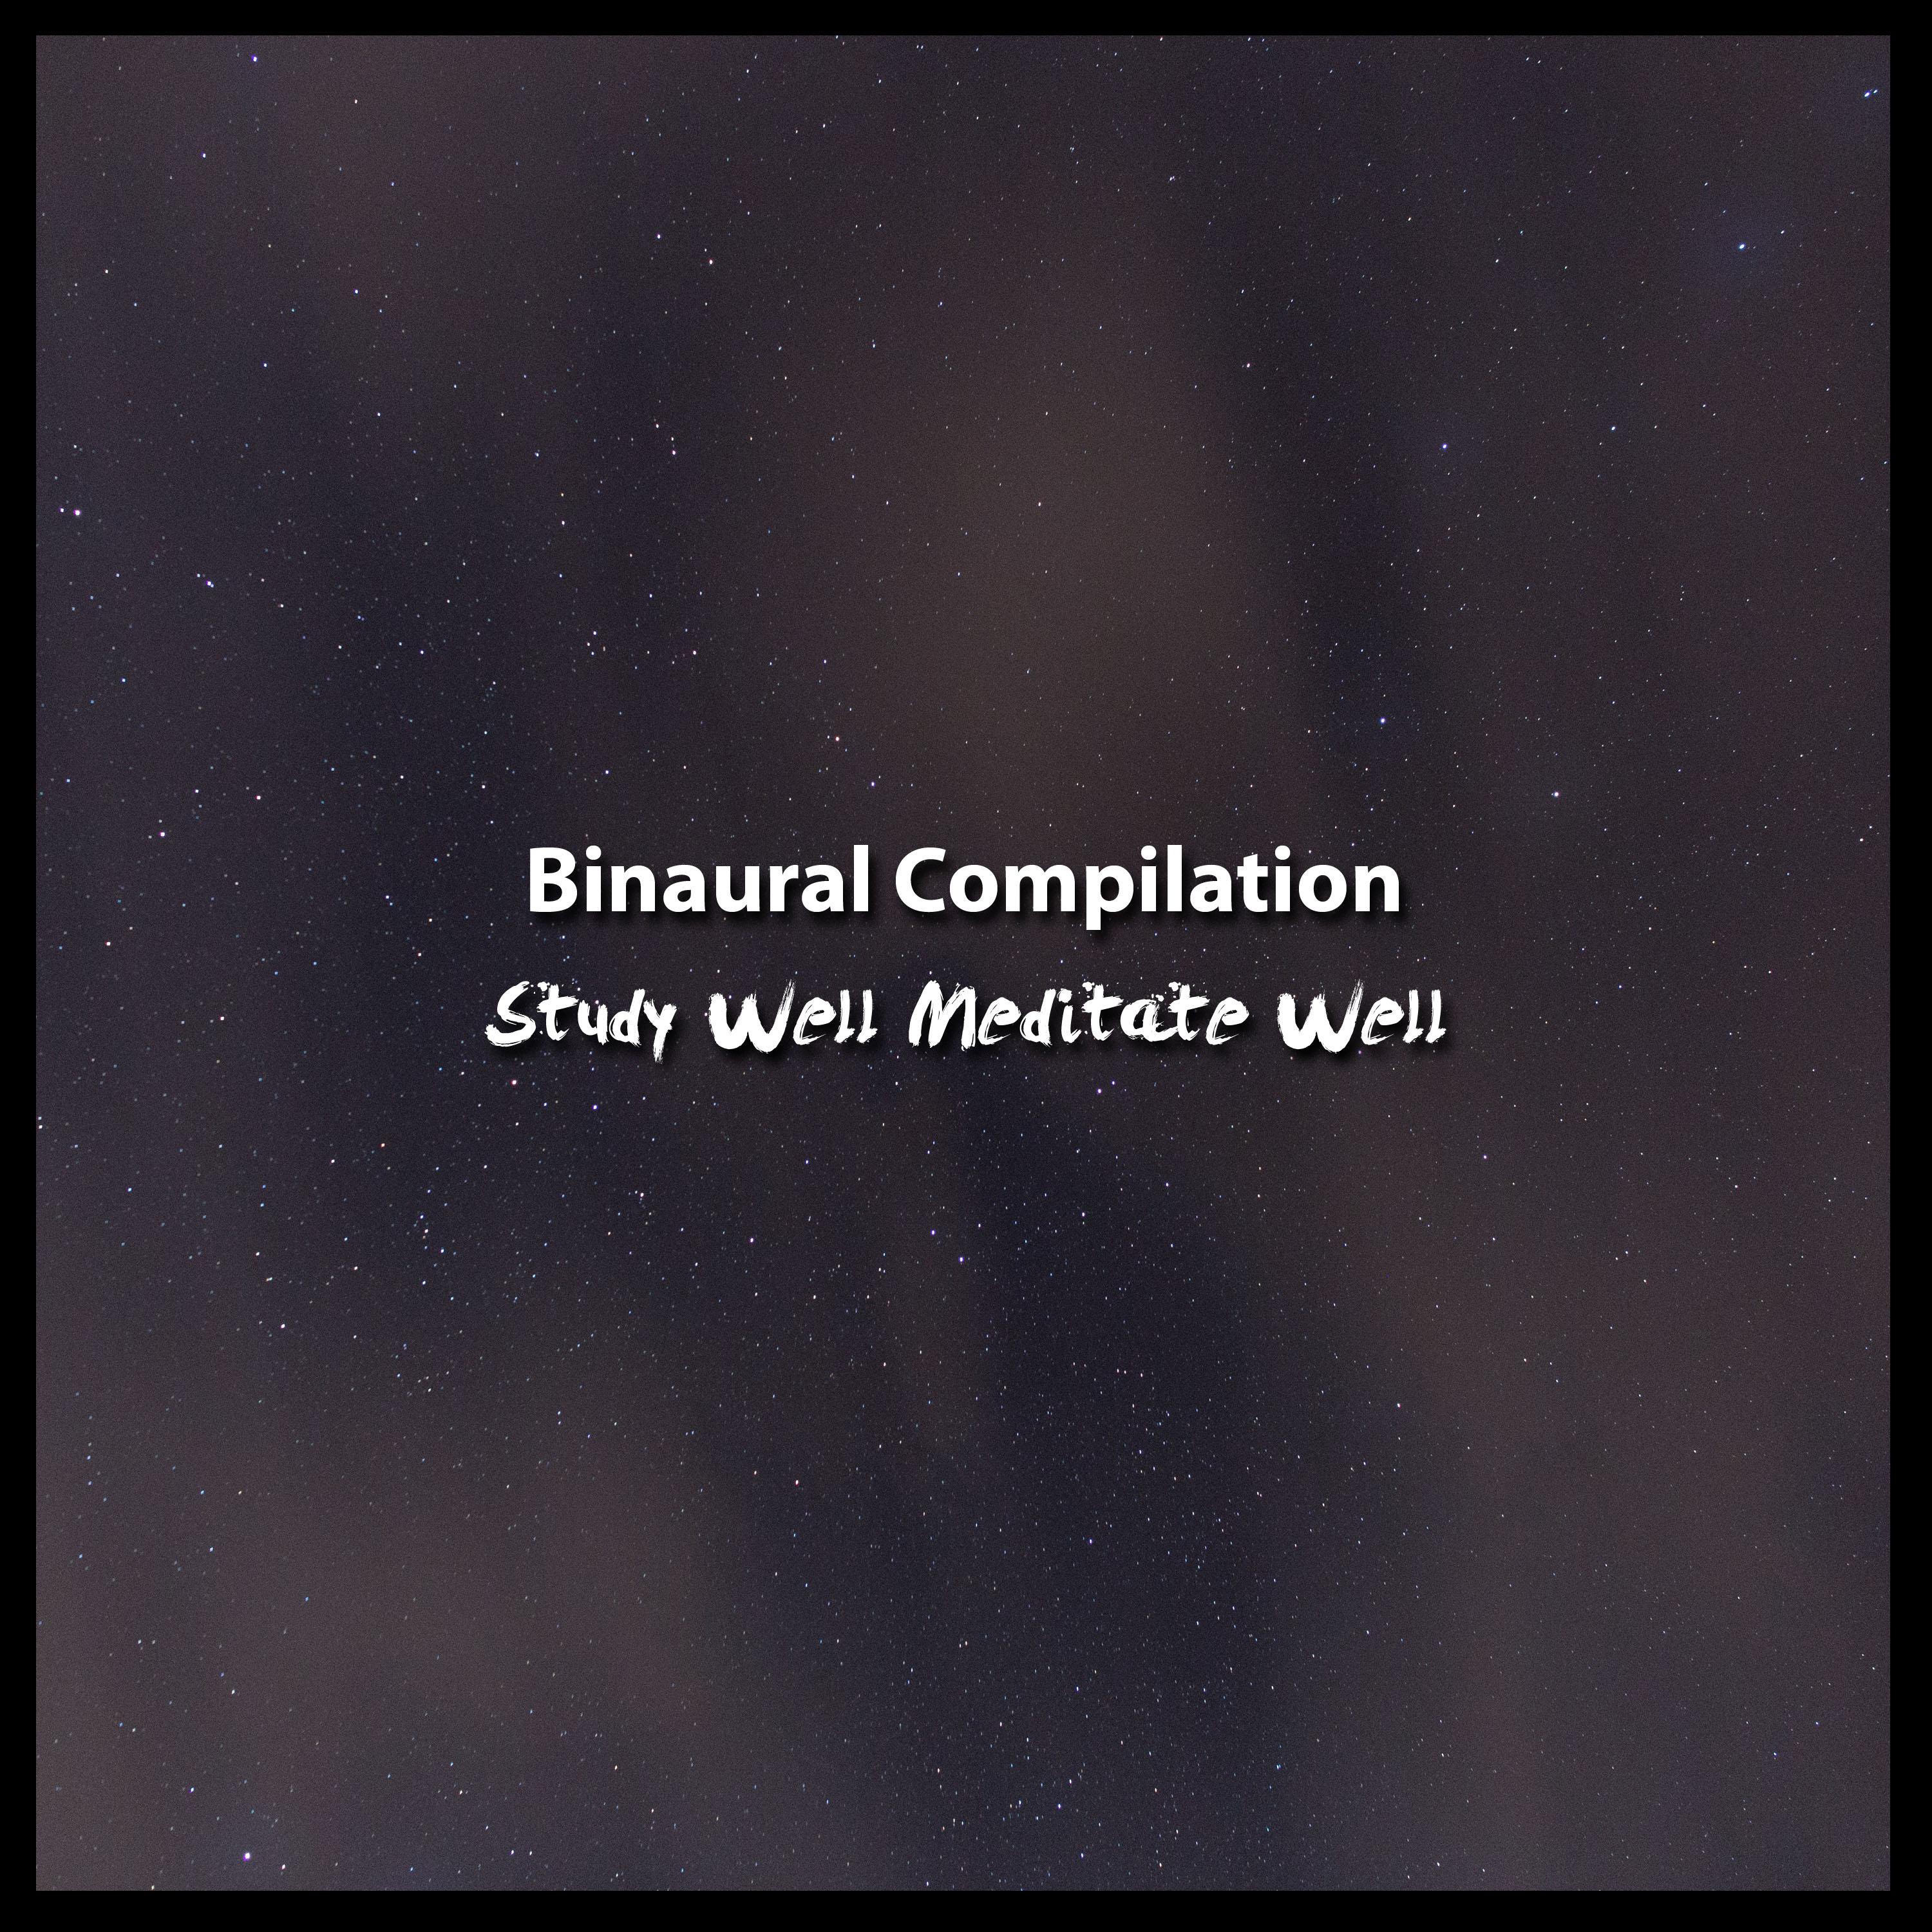 2018 A Binaural Compilation: Study Well Meditate Well